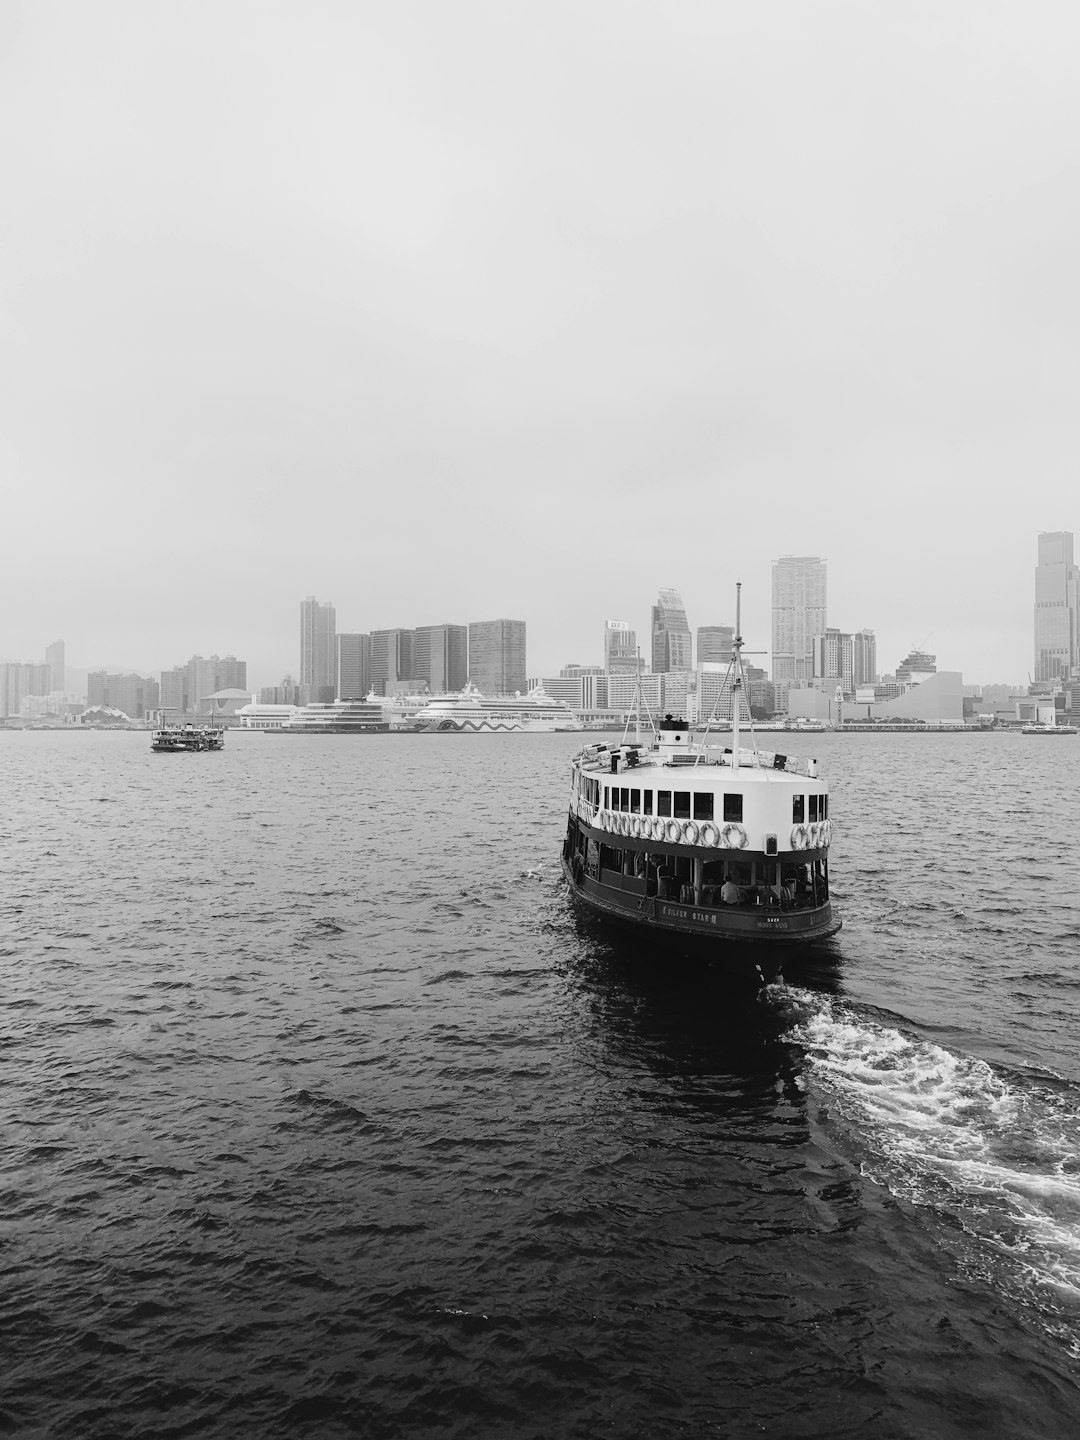 Travel Tips and Stories of Star Ferry Pier in Hong Kong